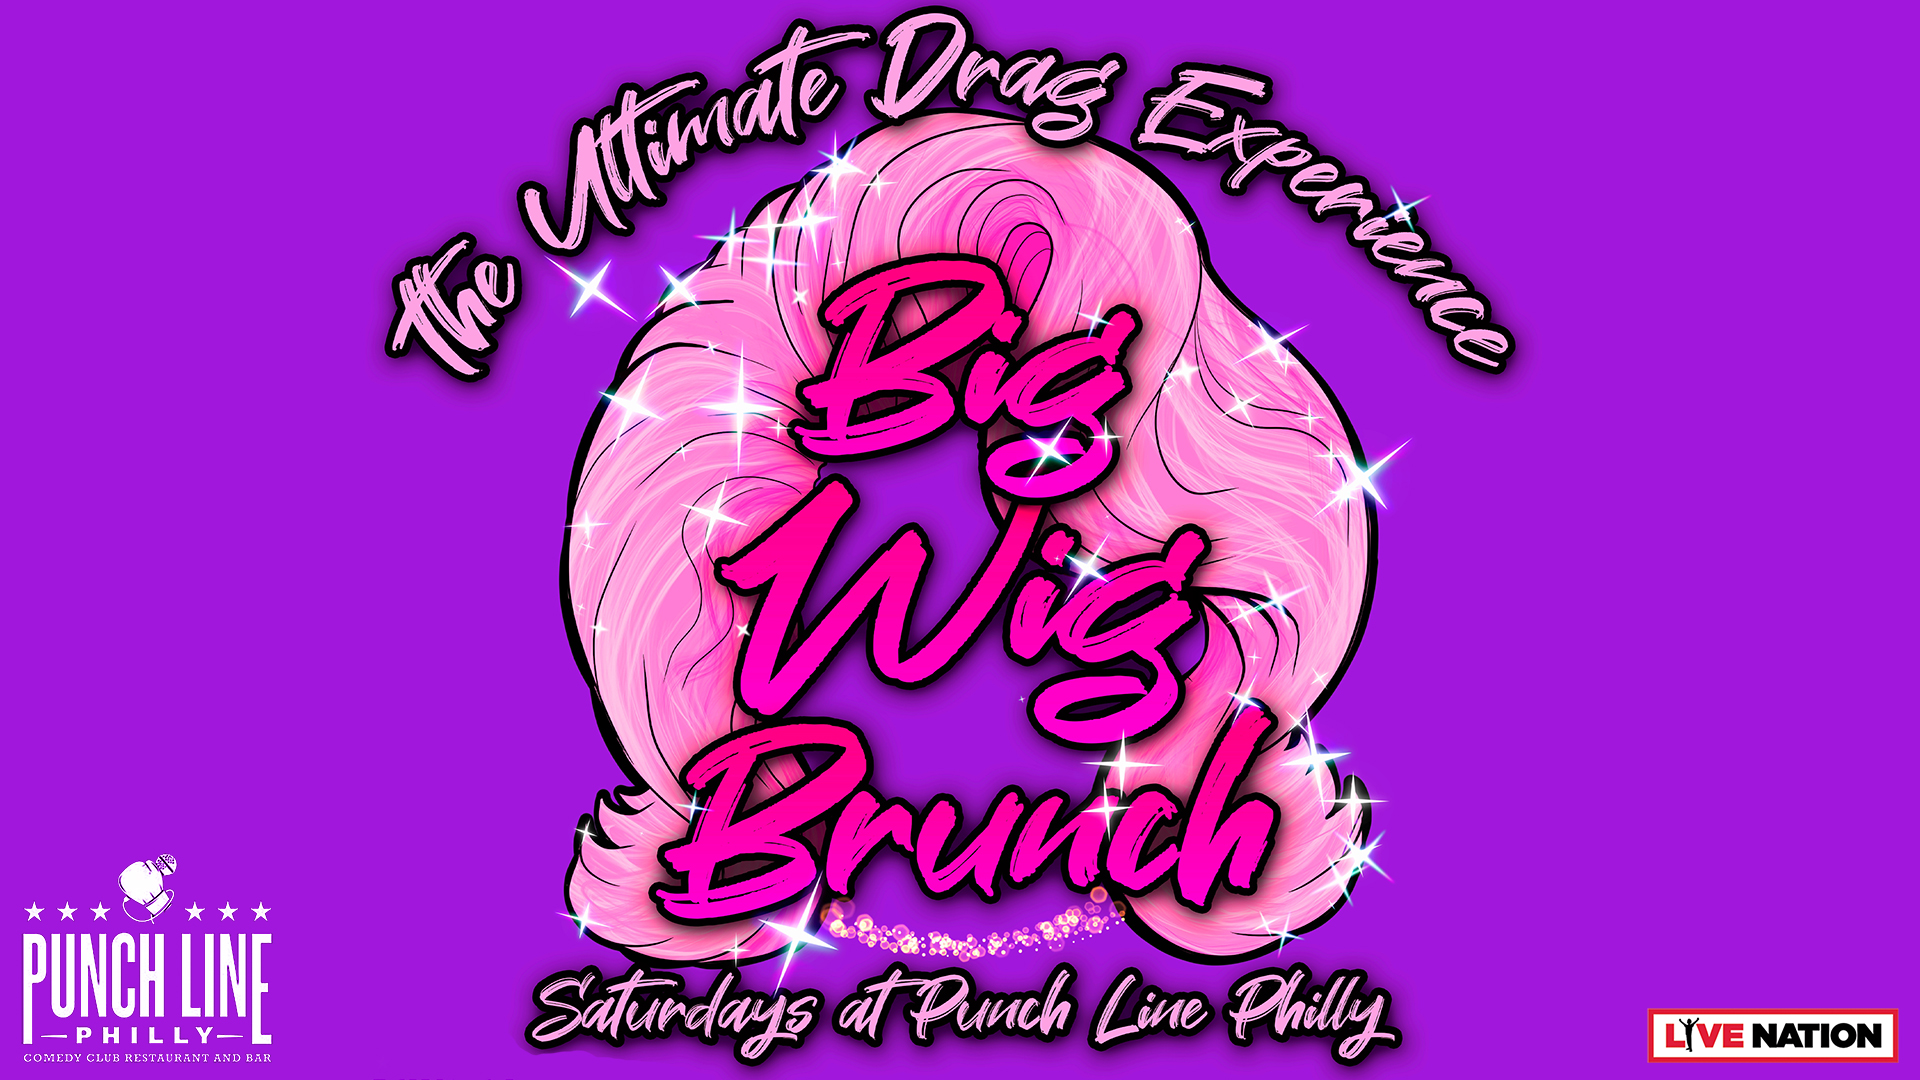 Big Wig Sex & The City Brunch: The Ultimate Drag Experience